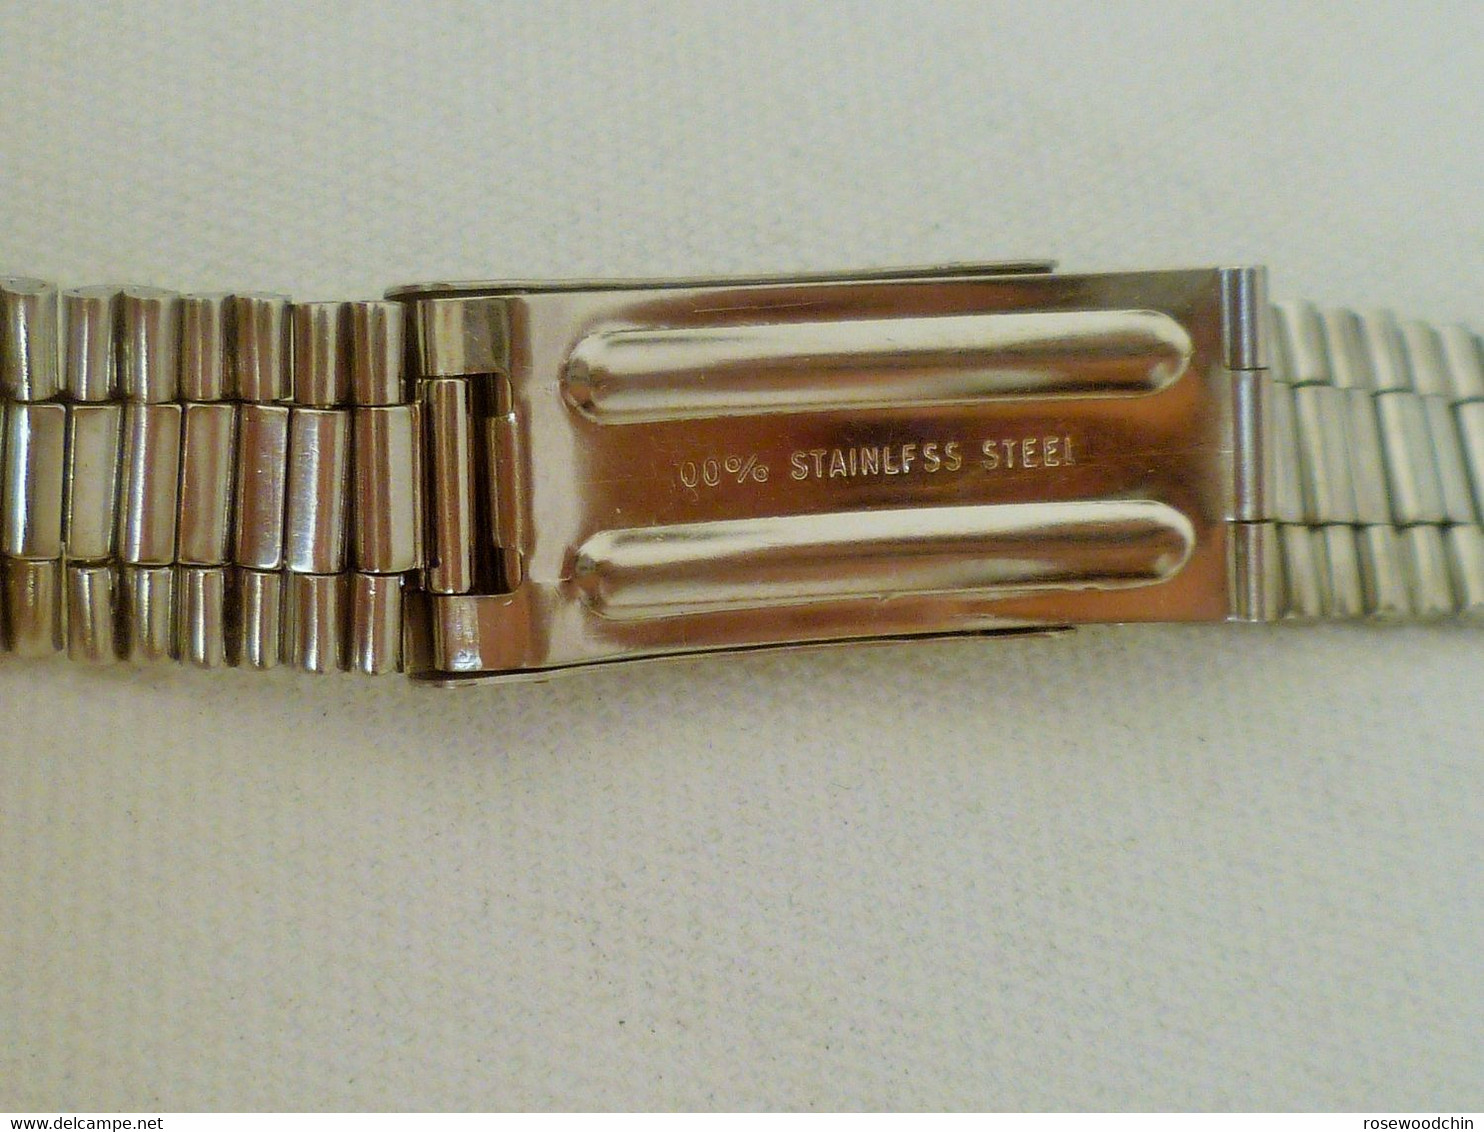 Vintage Stainless Steel Watch Band Bracelet Lug 19/20 mm for Man (#51)